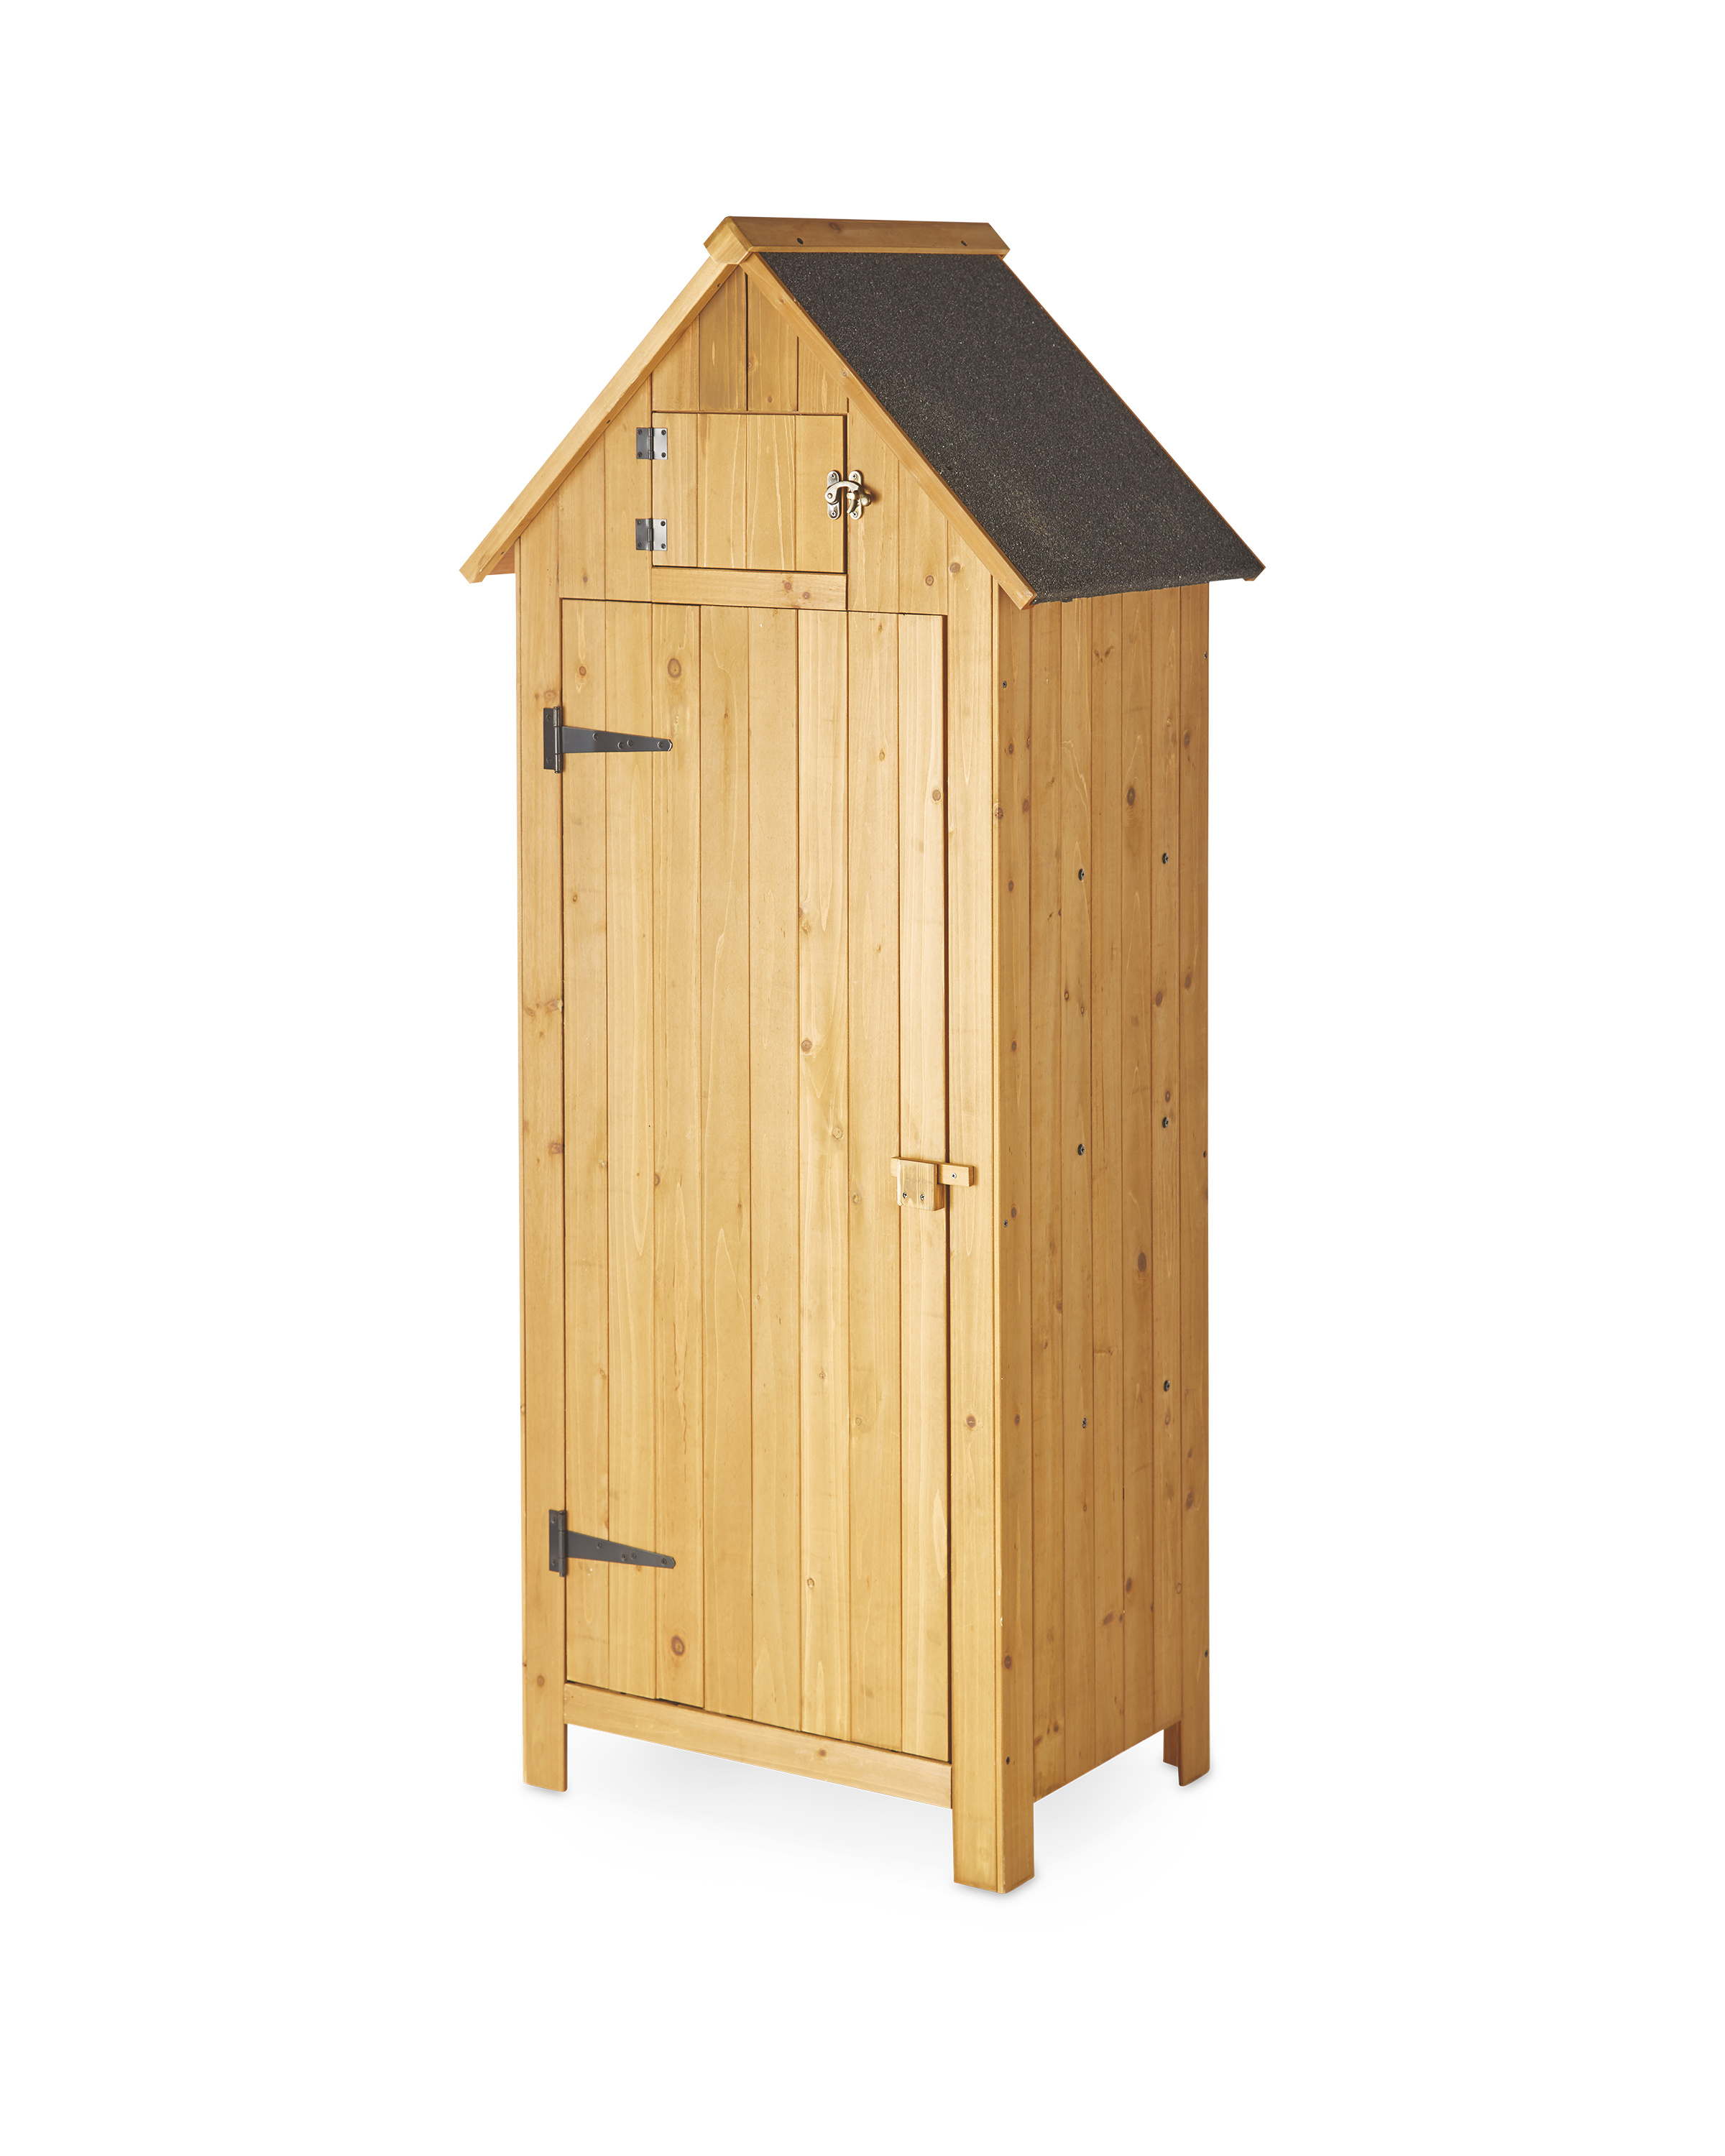 Gardenline Wooden Tool Shed Aldi Uk, Wooden Tool Shed